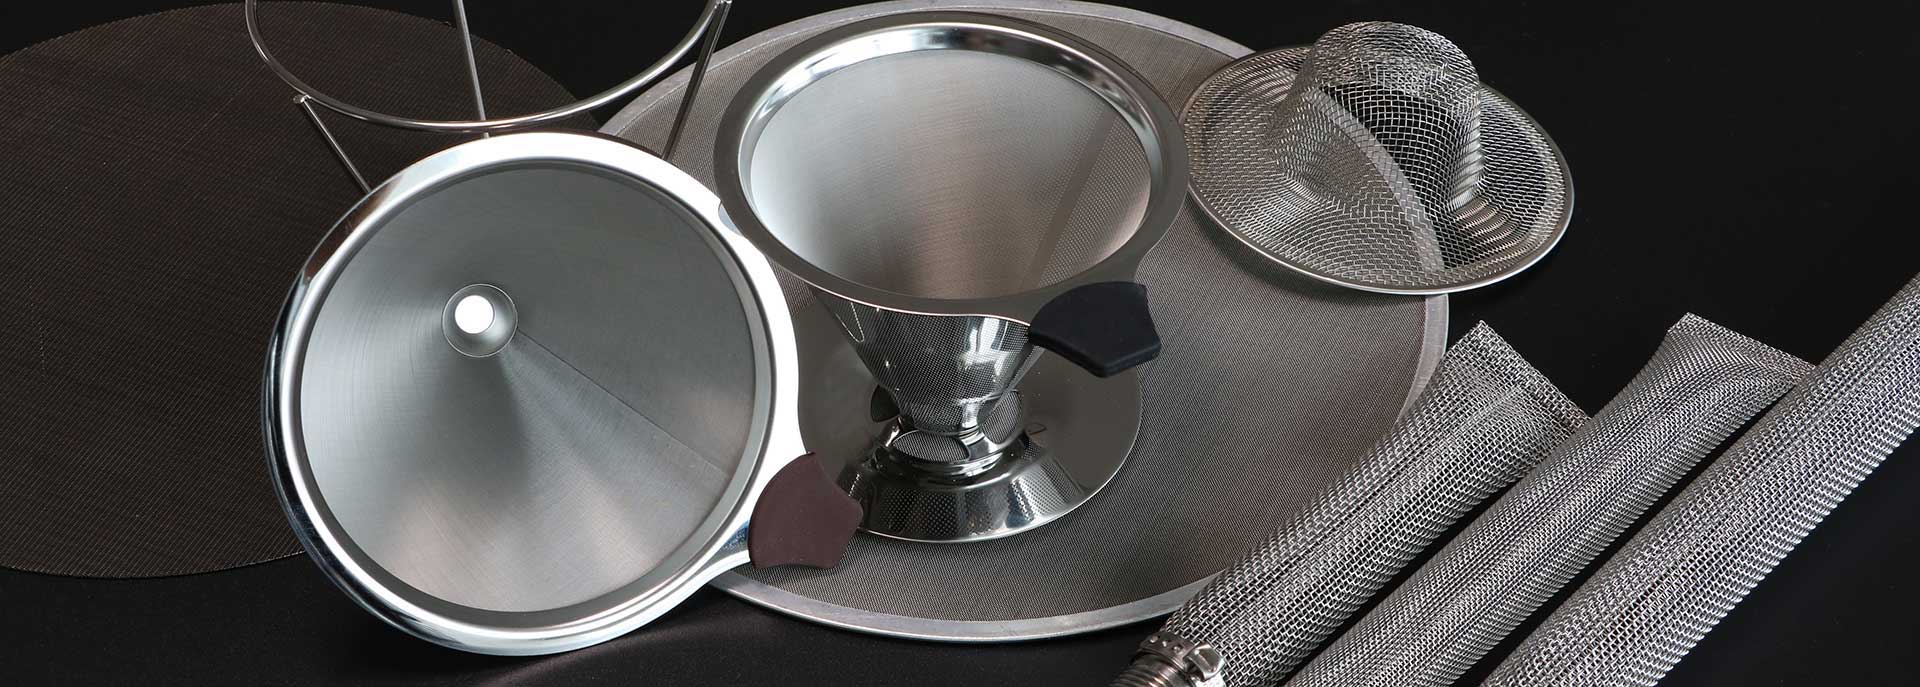 stainless steel coffee filter 